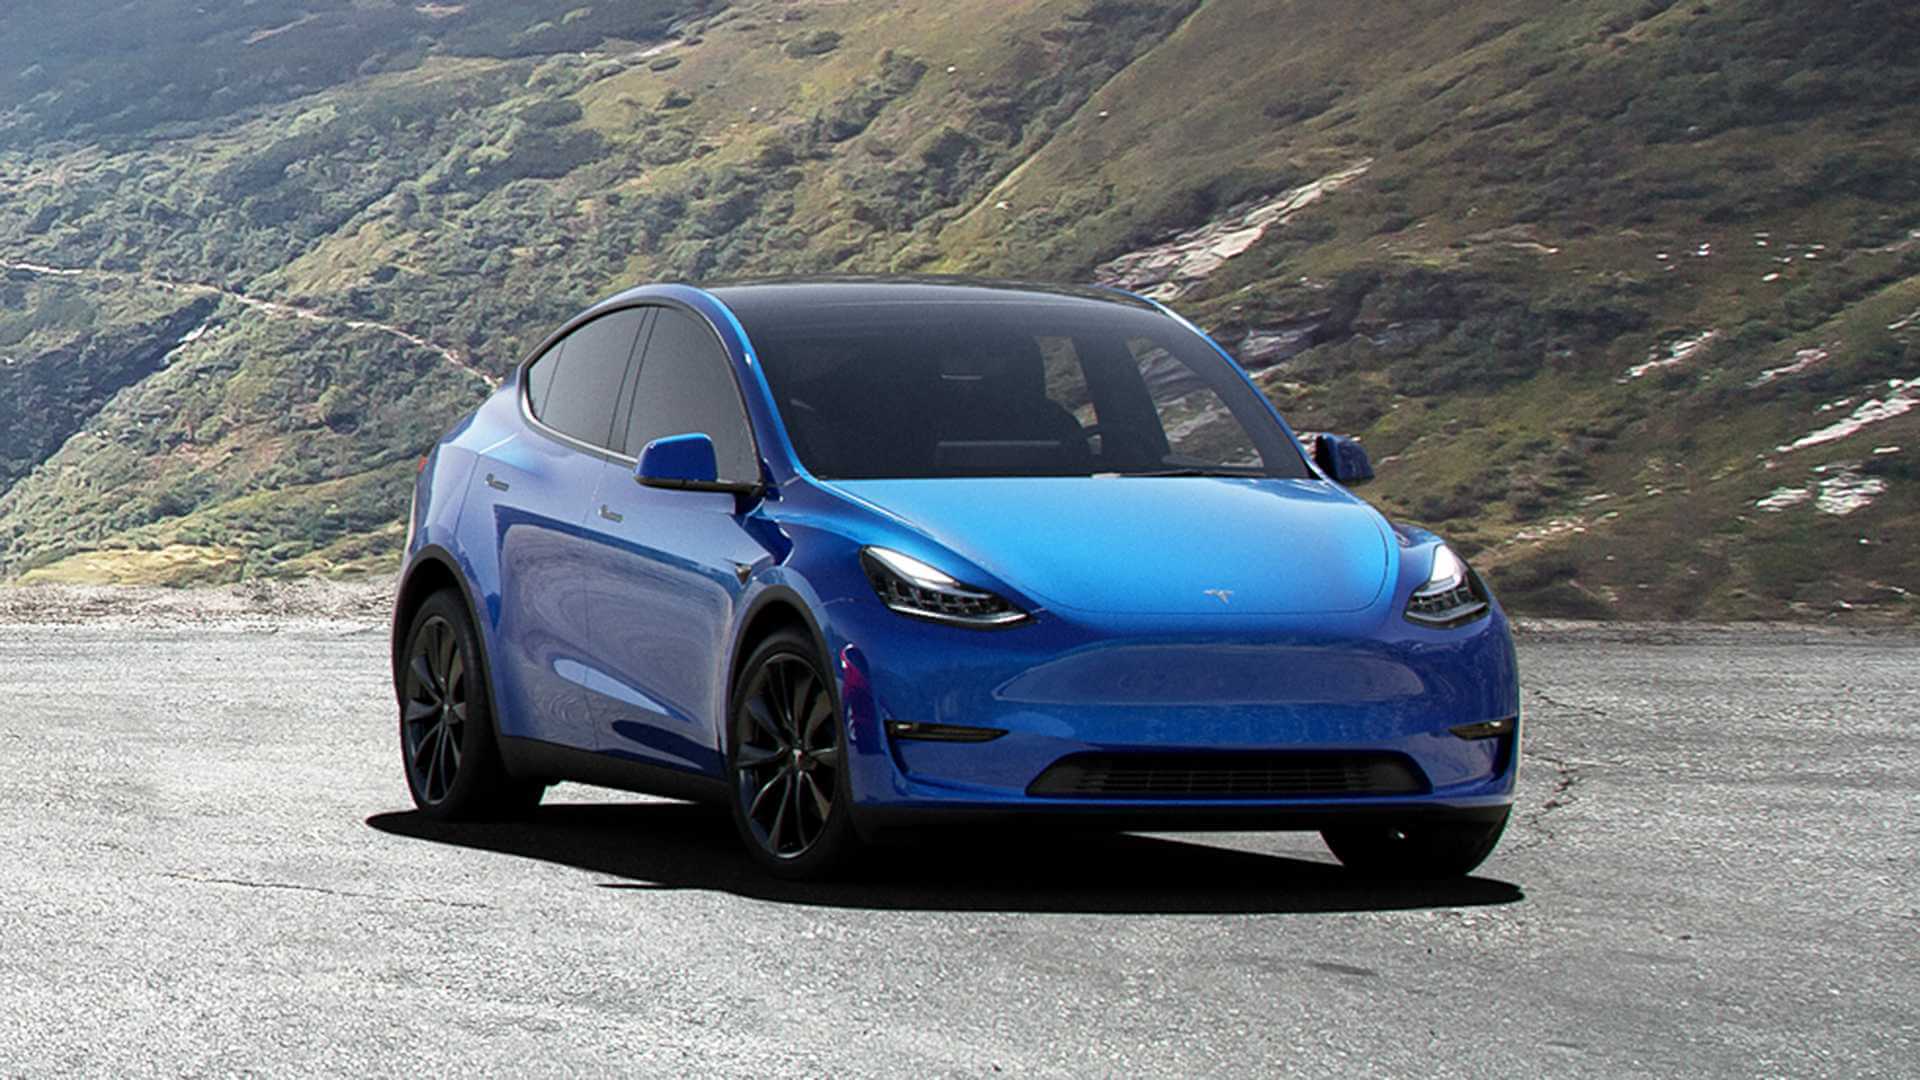 HD 2021 Tesla Model Y wallpapers and photos and images collection